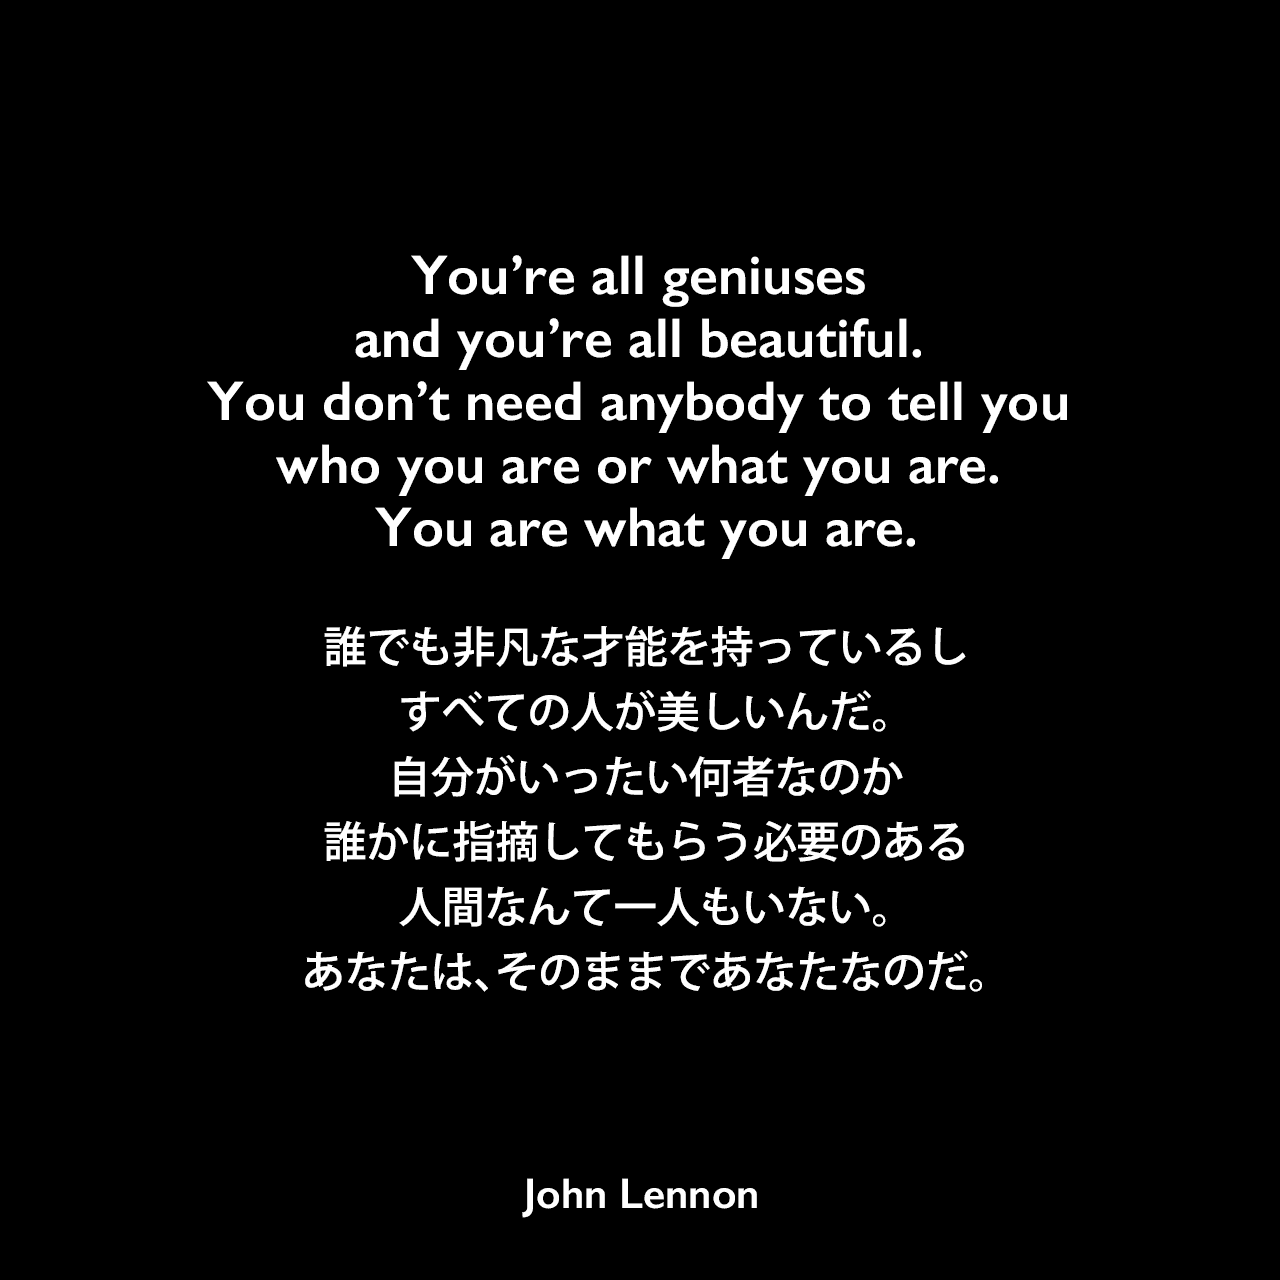 You’re all geniuses and you’re all beautiful. You don’t need anybody to tell you who you are or what you are. You are what you are.誰でも非凡な才能を持っているし、すべての人が美しいんだ。自分がいったい何者なのか、誰かに指摘してもらう必要のある人間なんて一人もいない。あなたは、そのままであなたなのだ。- 1969年7月のプレス発表会のコメント